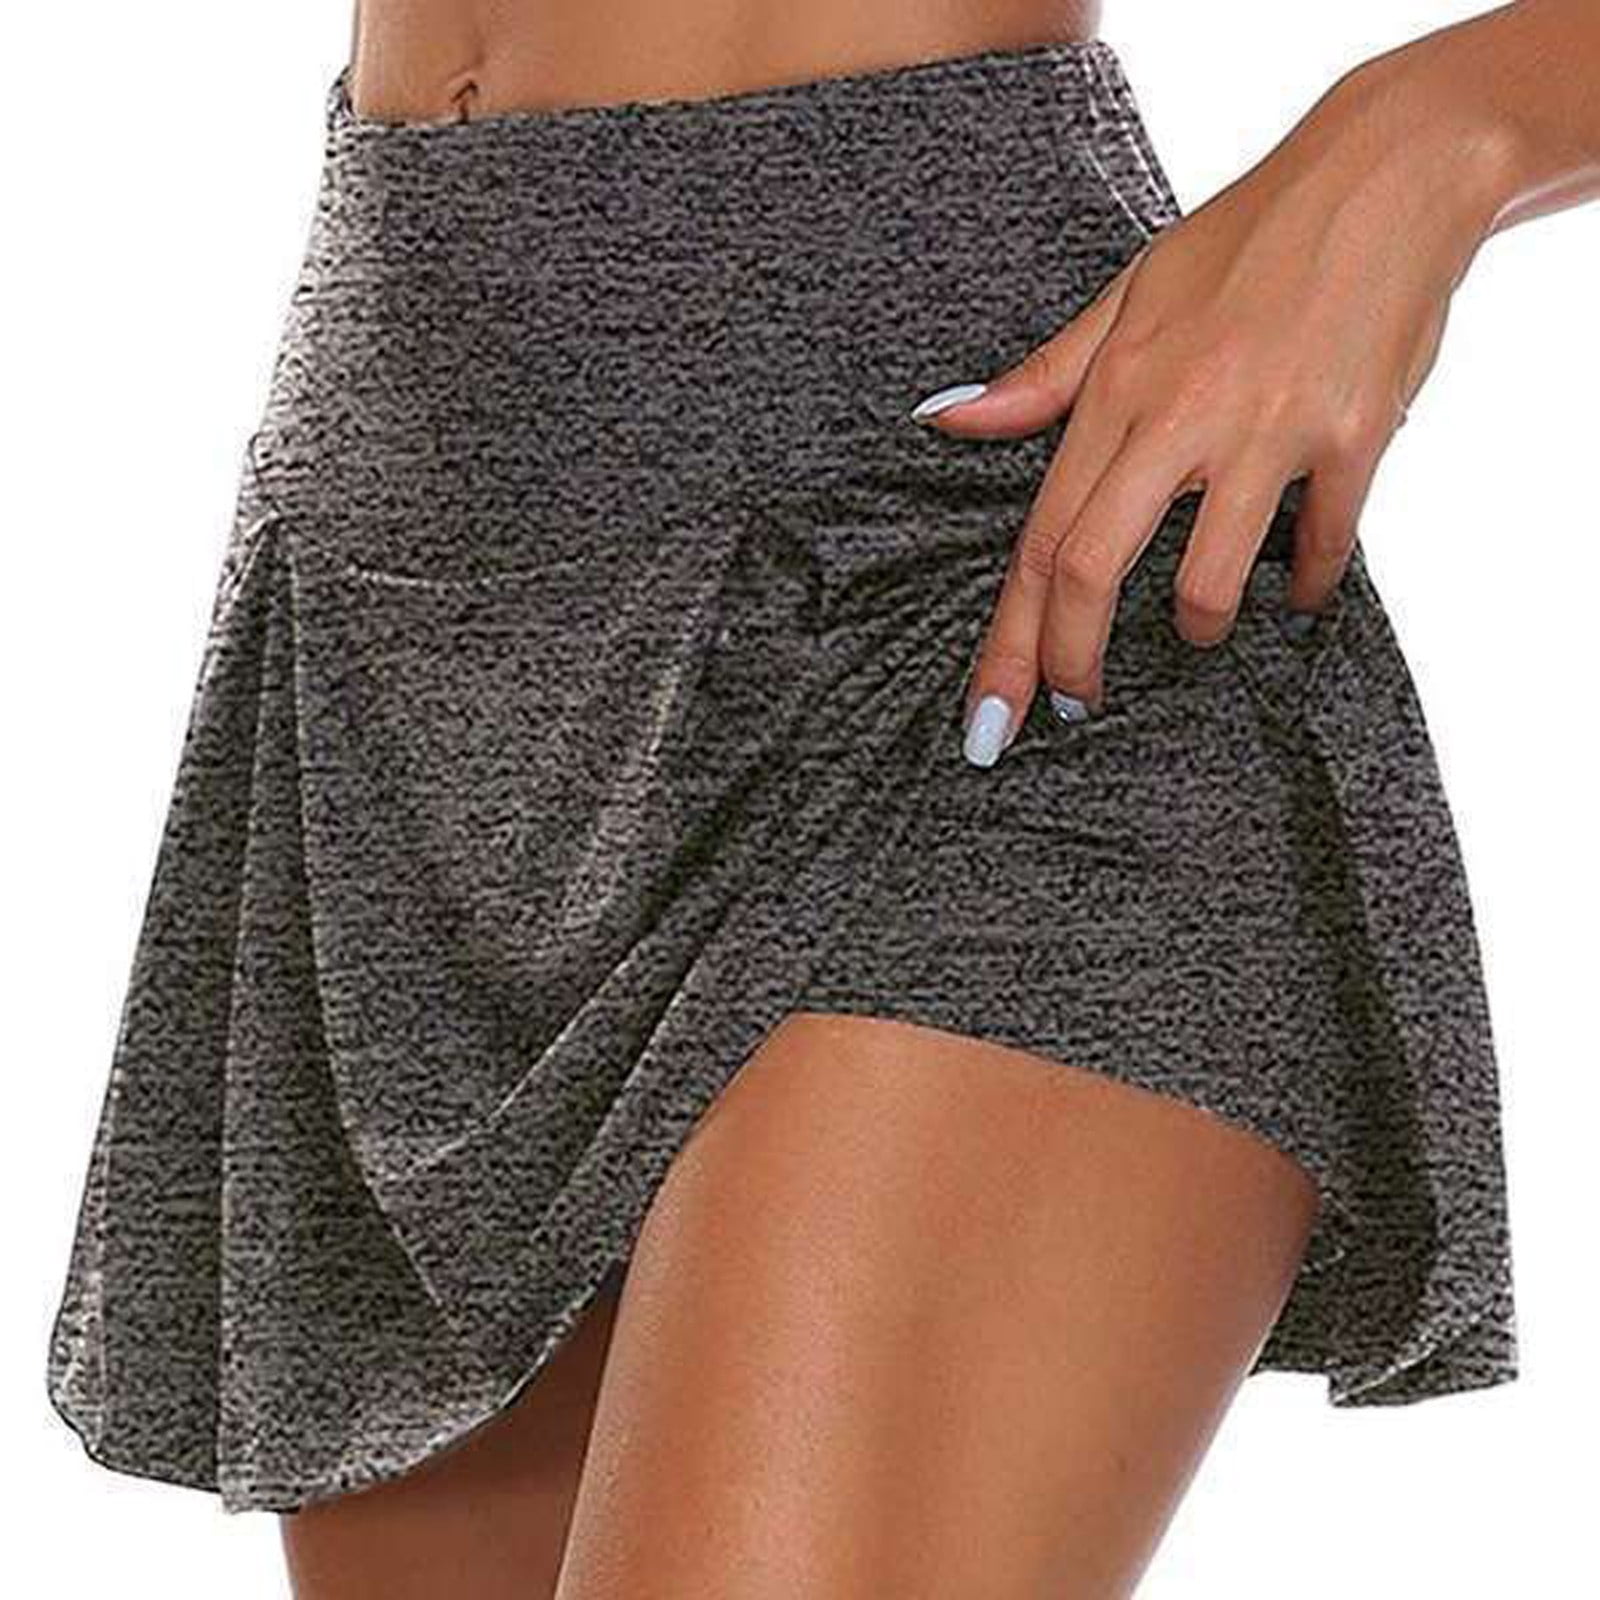 Best Sales! Gym Shorts Women, Athletic Shorts for Women, High